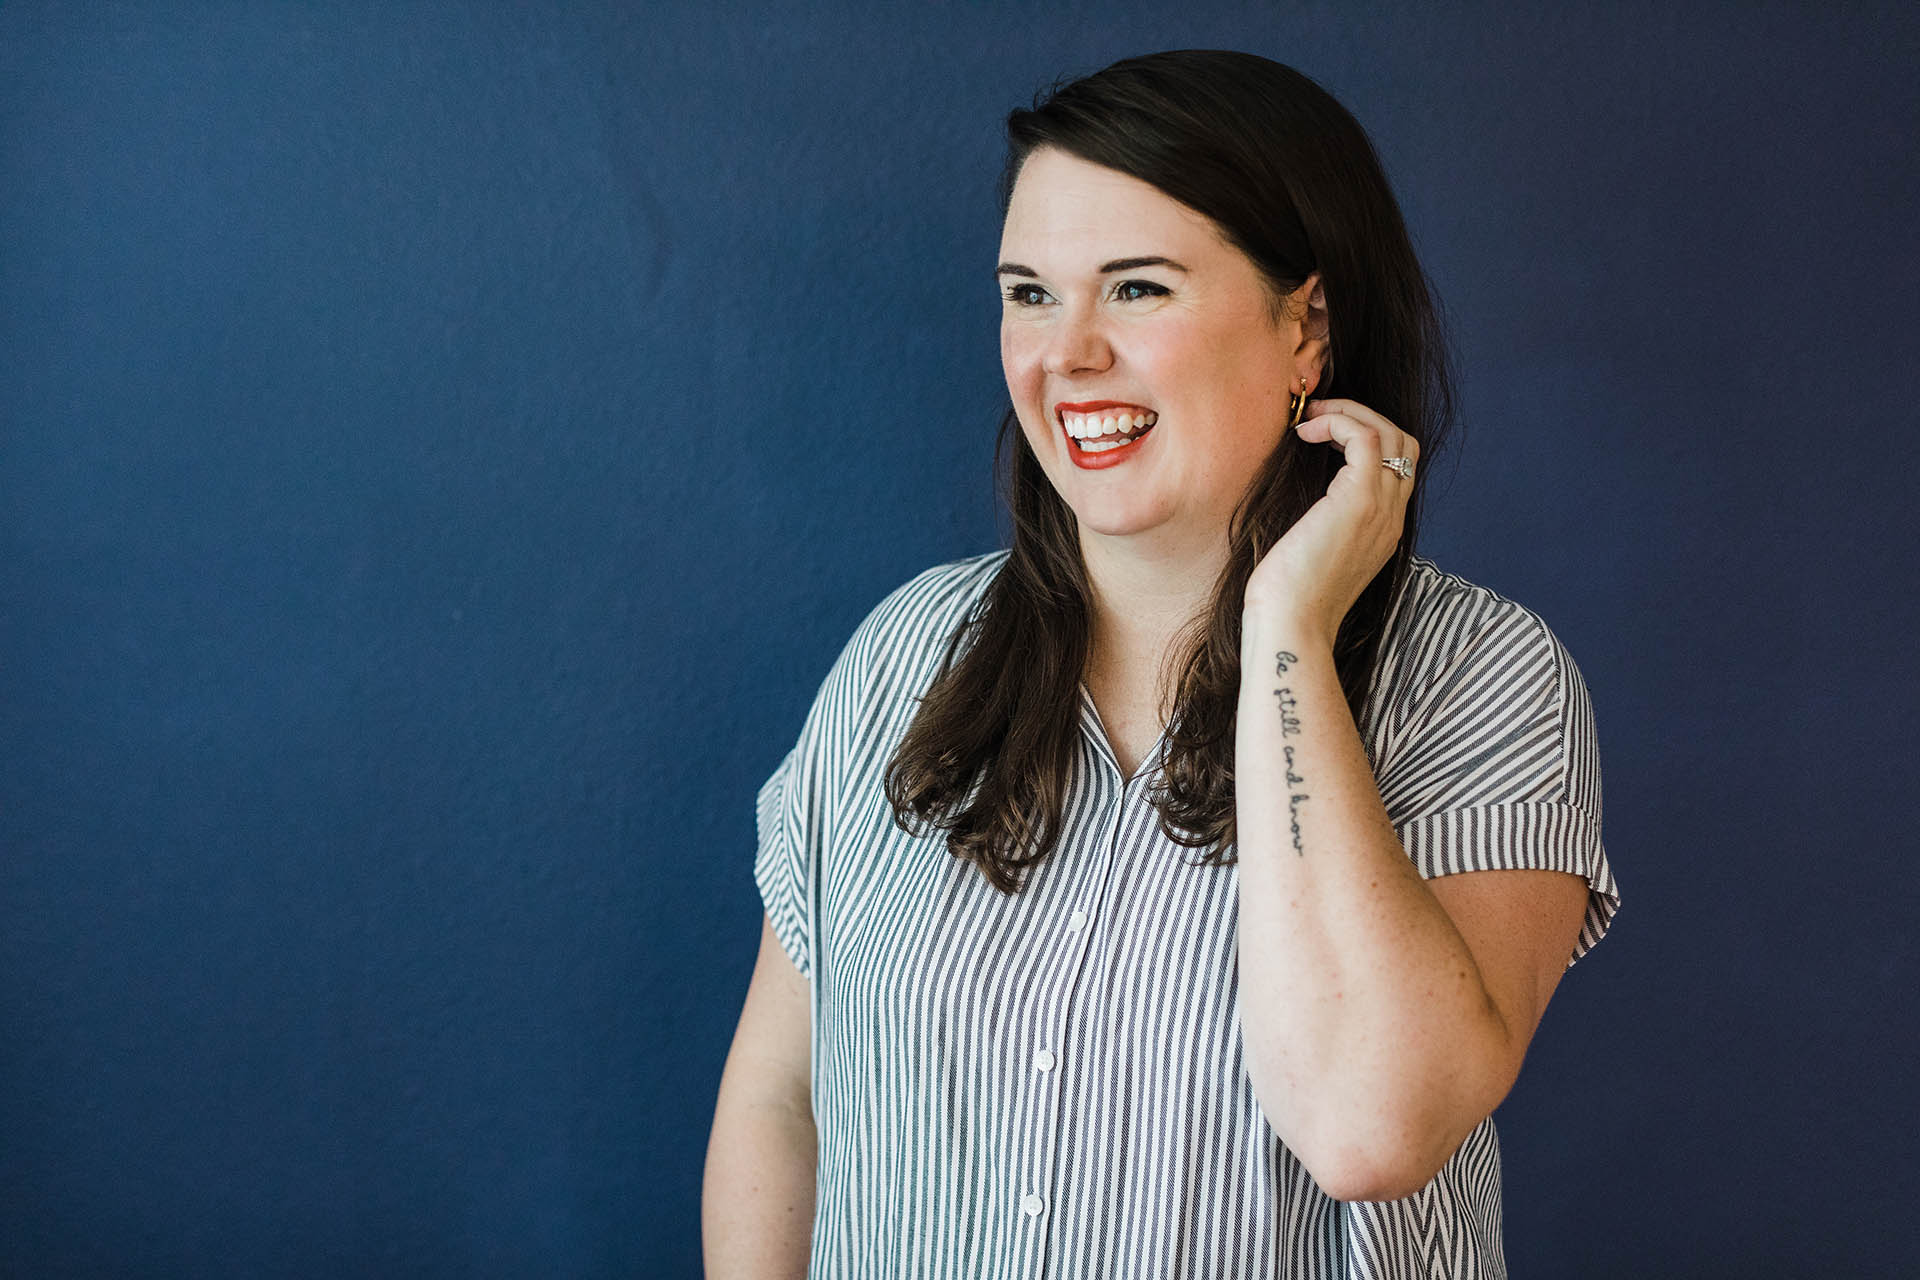 Corporate photographer DFW; a woman wearing a blue and white striped shirt smiling and looking off into the distance in front of a blue background. Her left arm is reaching up towards her face and her forearm tattoo reads "Be still and know."